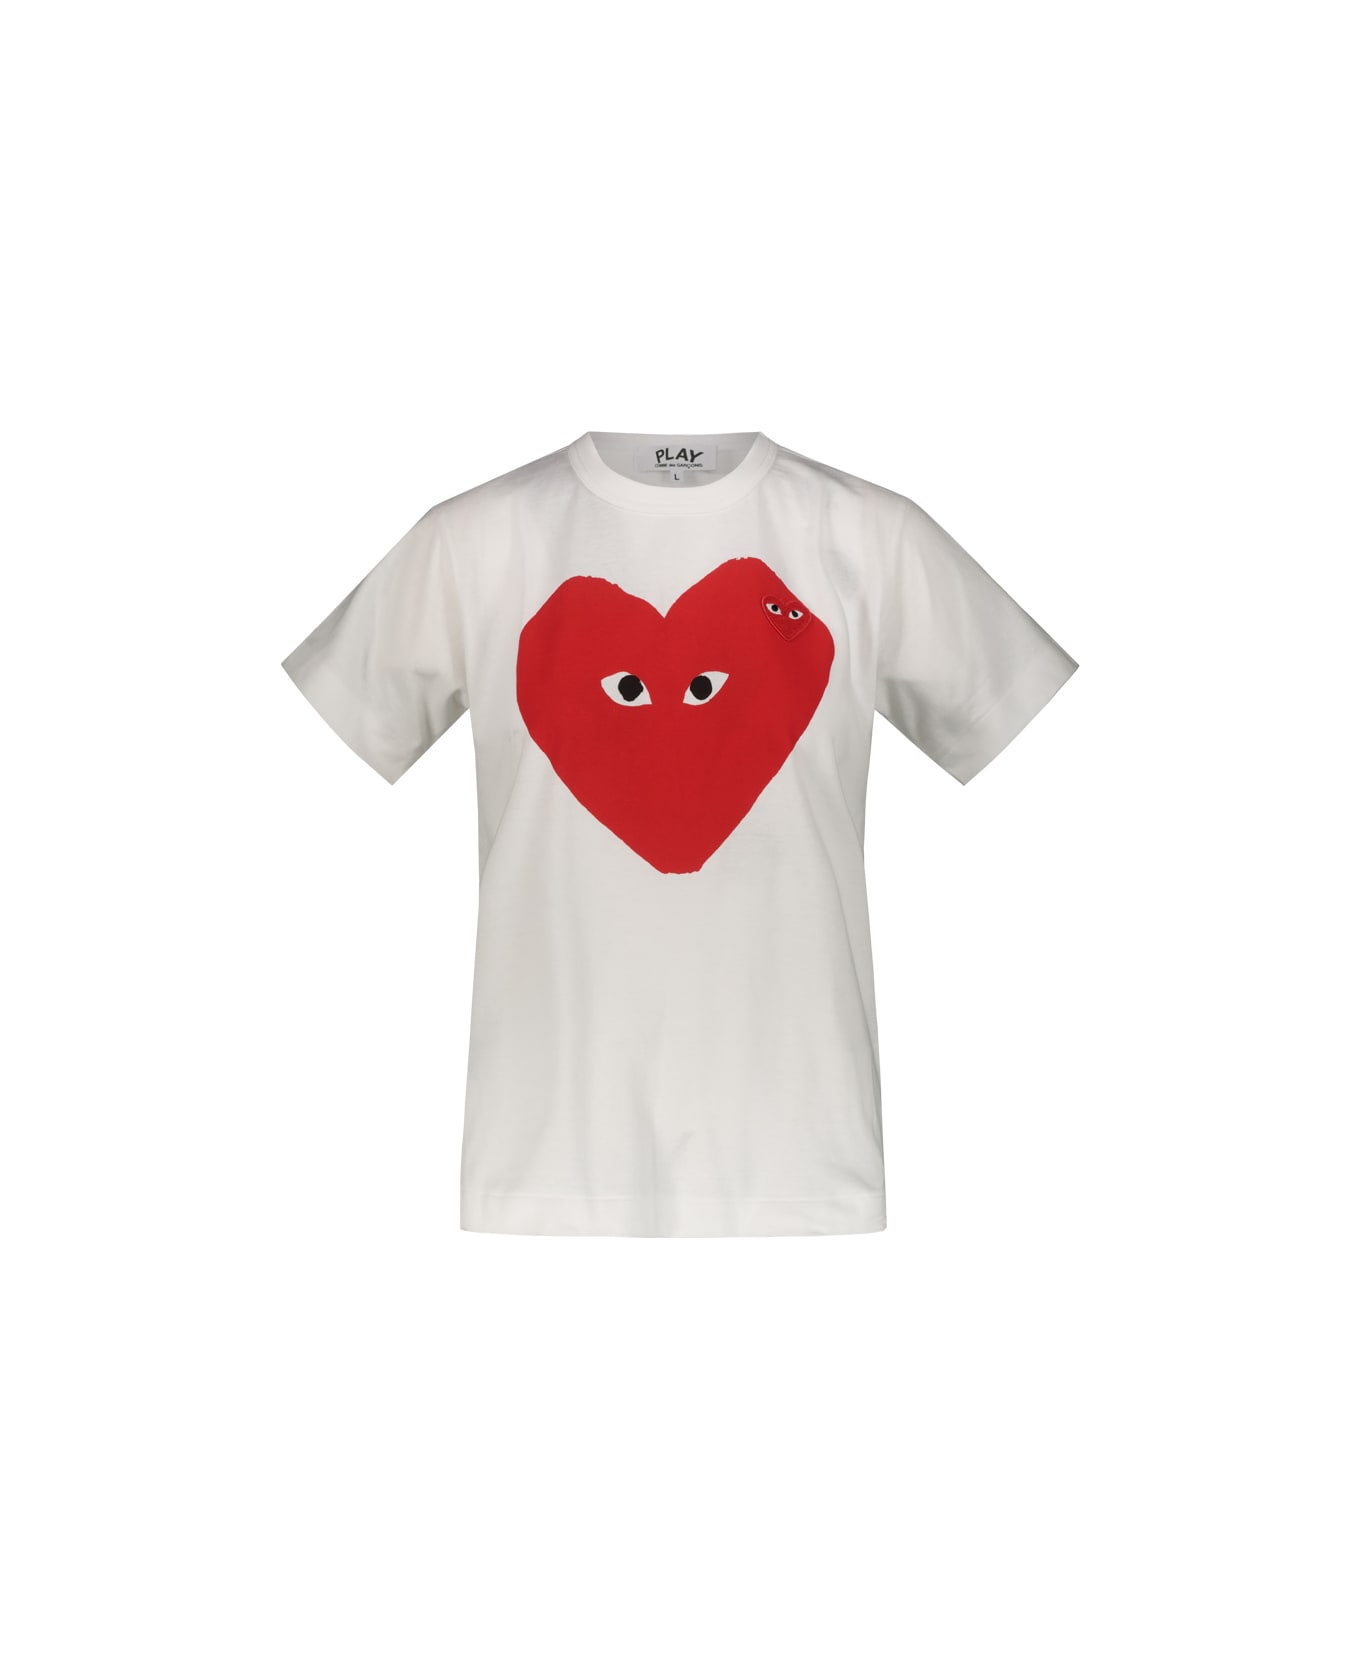 Comme des Garçons Play White T-shirt With Printed Red Heart - Blk